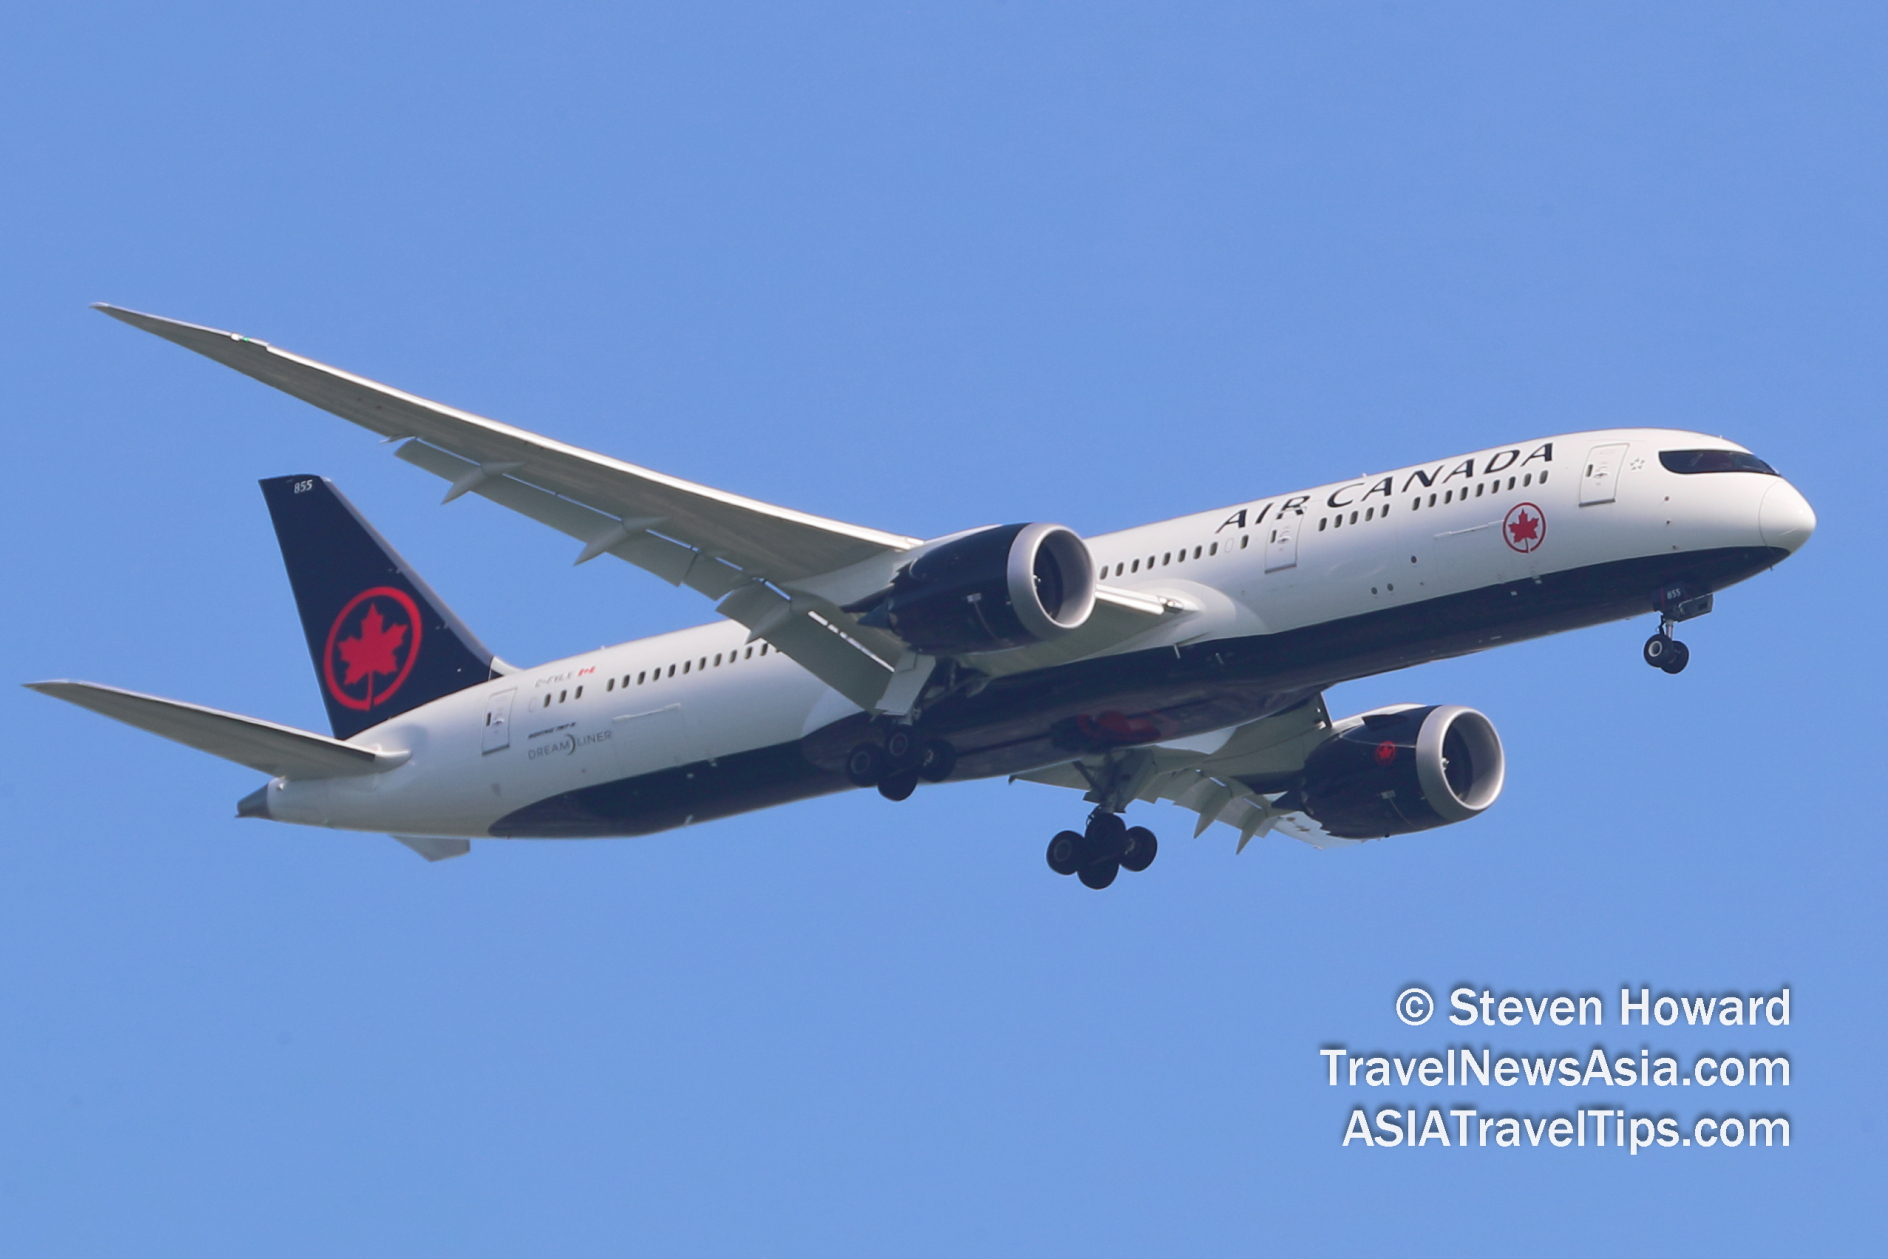 Air Canada Boeing 787-9 reg: C-FVLX. Picture by Steven Howard of TravelNewsAsia.com Click to enlarge.